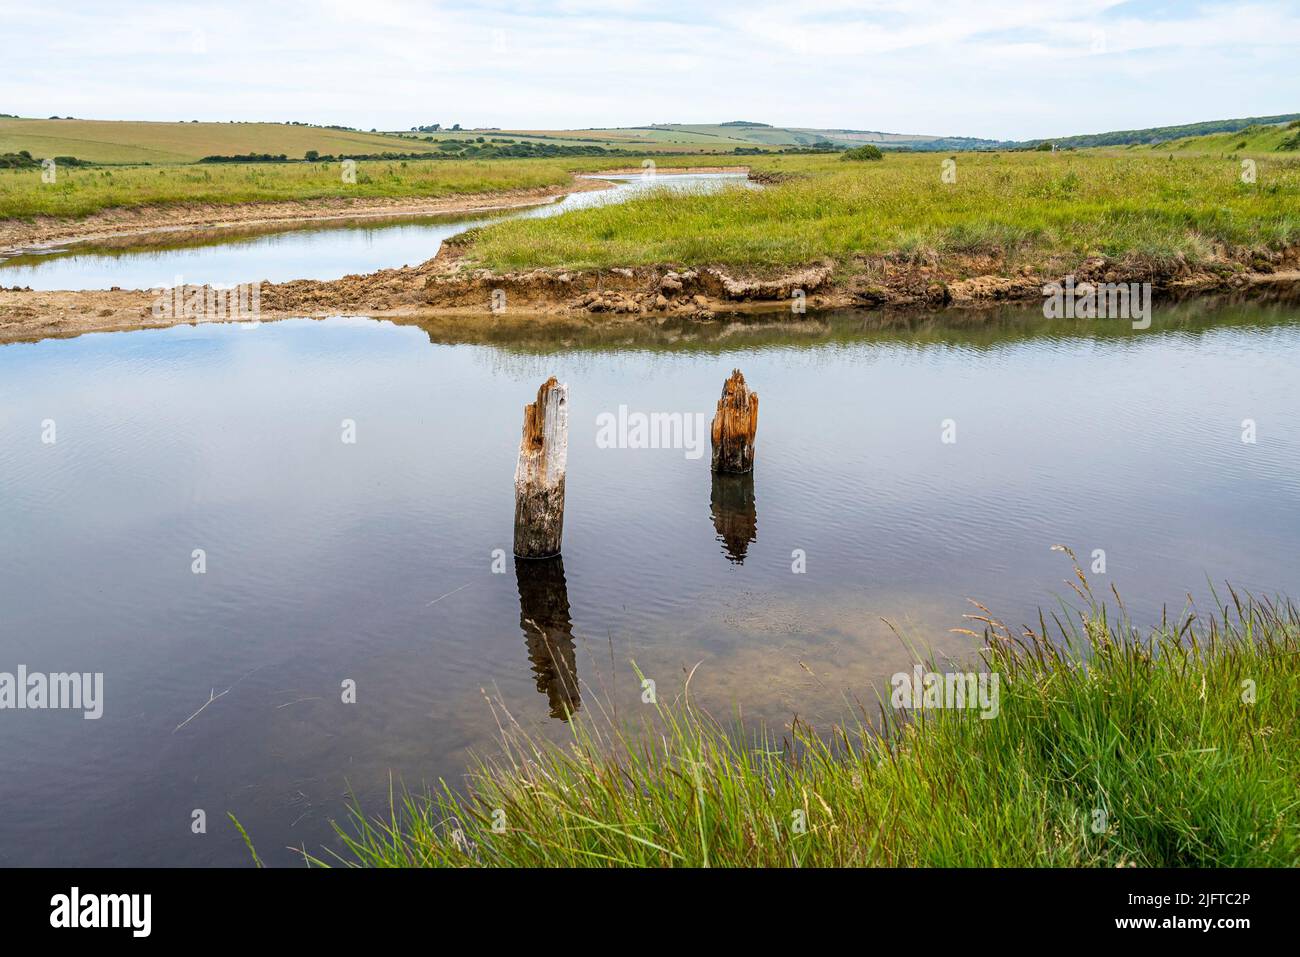 Cuckmere Haven & Seaford East Sussex England UK - Landscape showing old wooden pillars in water looking north across the flooded area Stock Photo